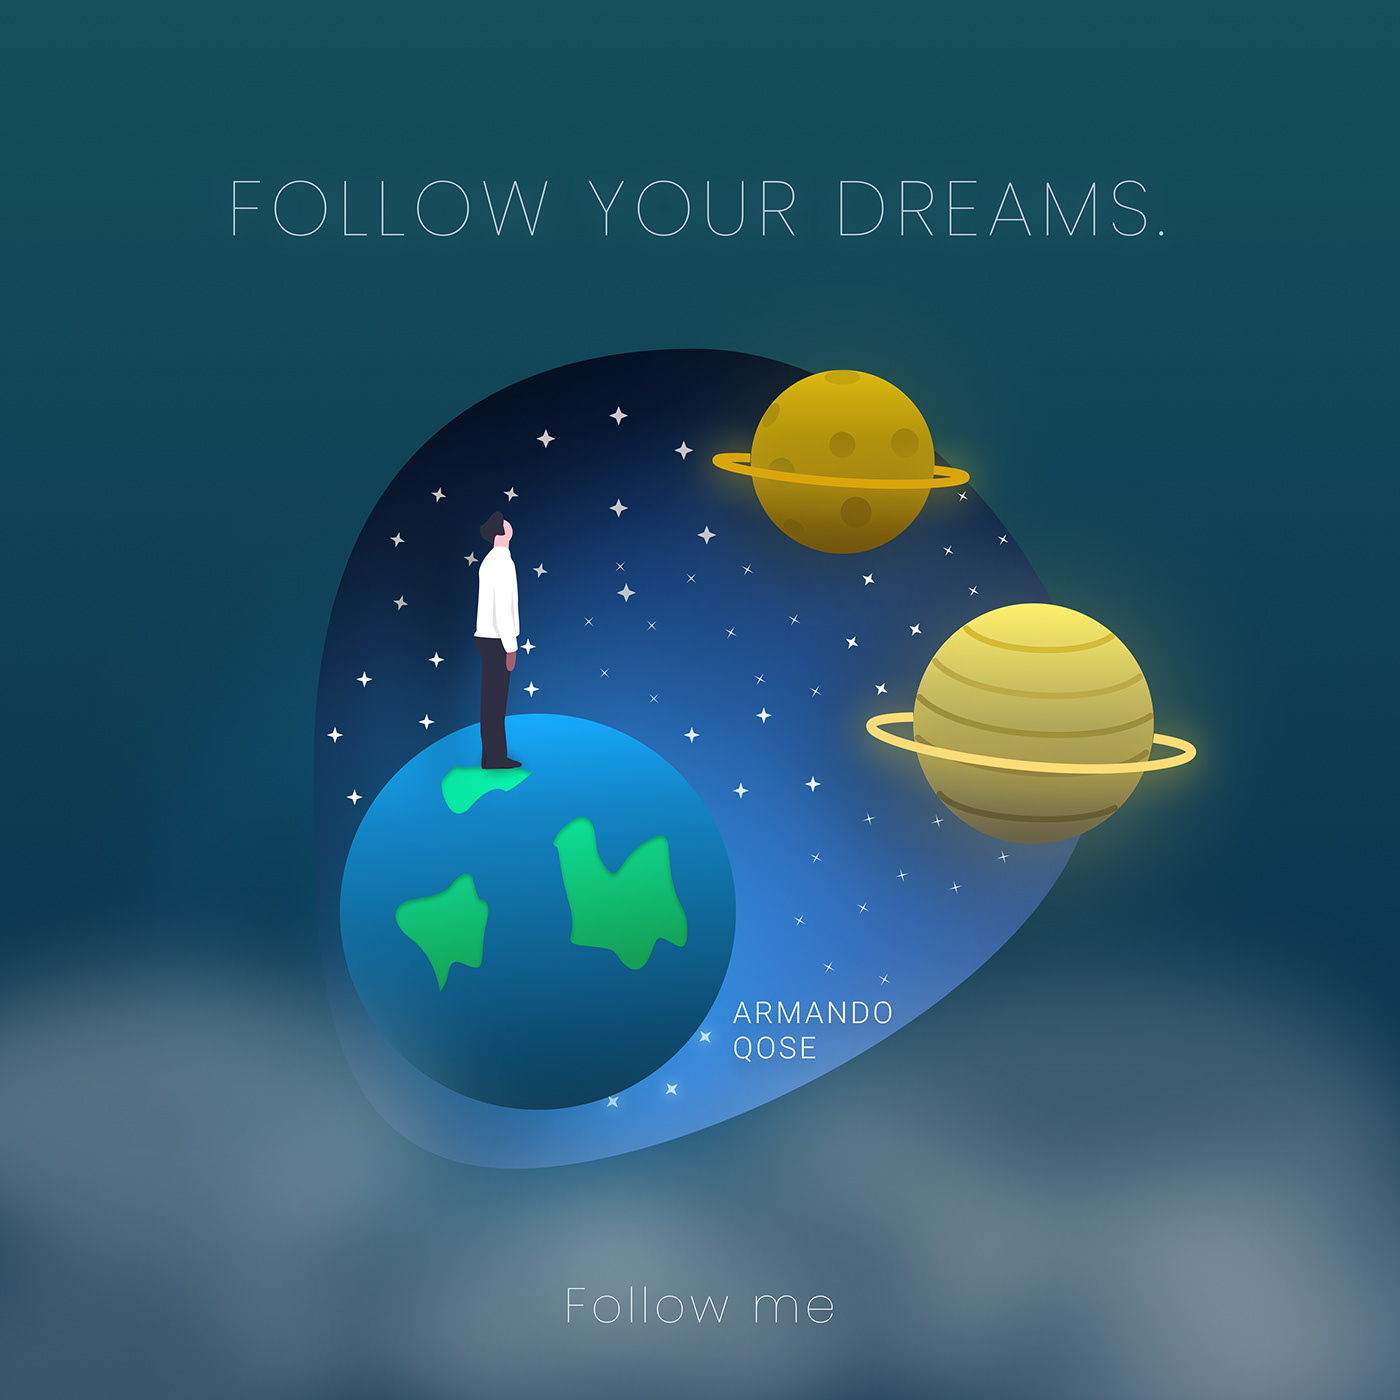 #graphic design dreams earth follow your dreams galaxy ilustration moon Planets stars univers